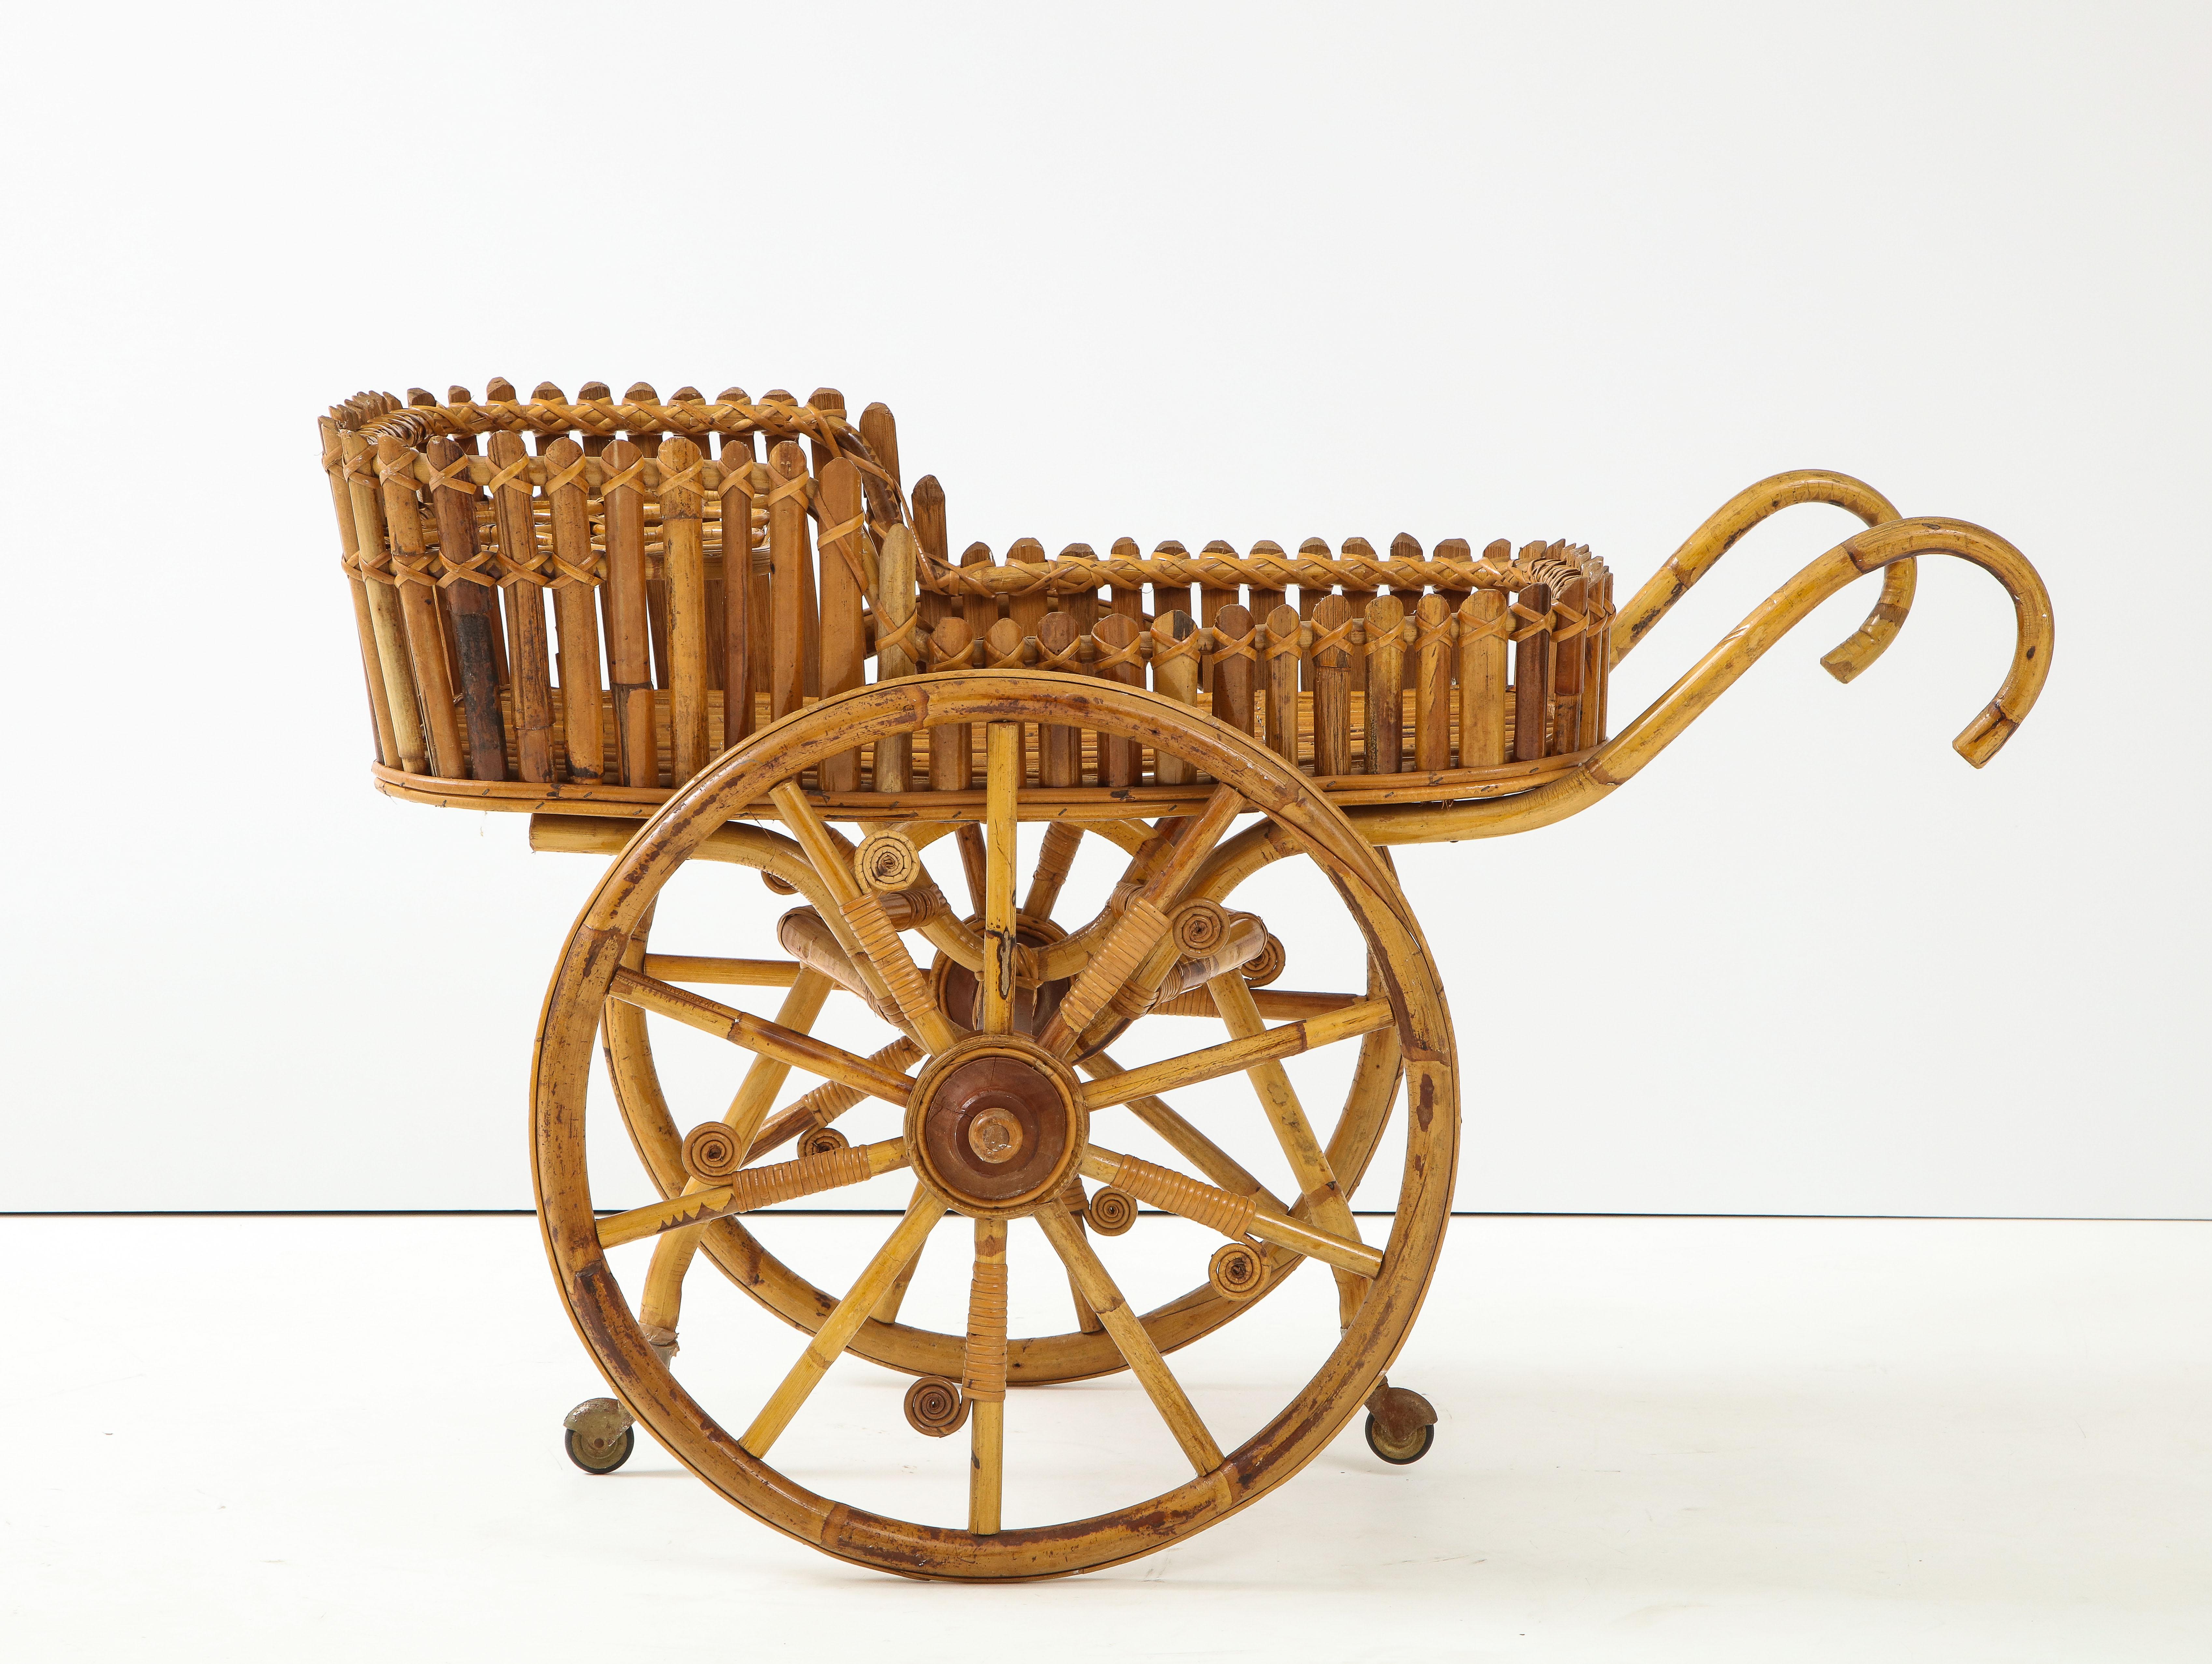 An Italian 1970's bamboo and wood bar cart with eight bottle holders, large storage basket, supported on two large wheels decorated with wood and bamboo swirls between the spokes. Move this piece around with its elegantly outstretched curved